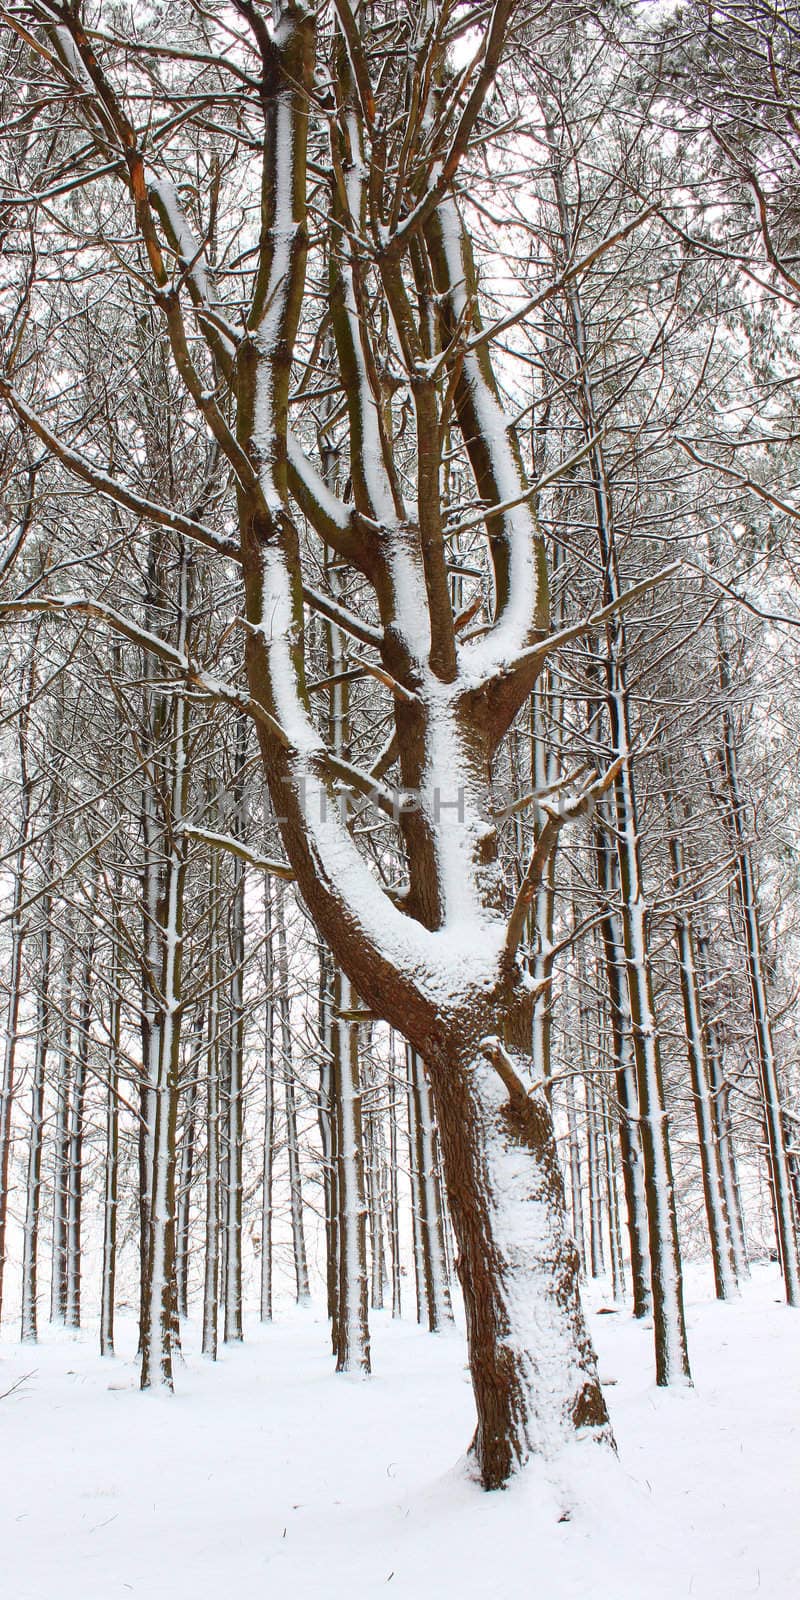 A magnificent winter scene in a pine forest at Rock Cut State Park - Illinois.